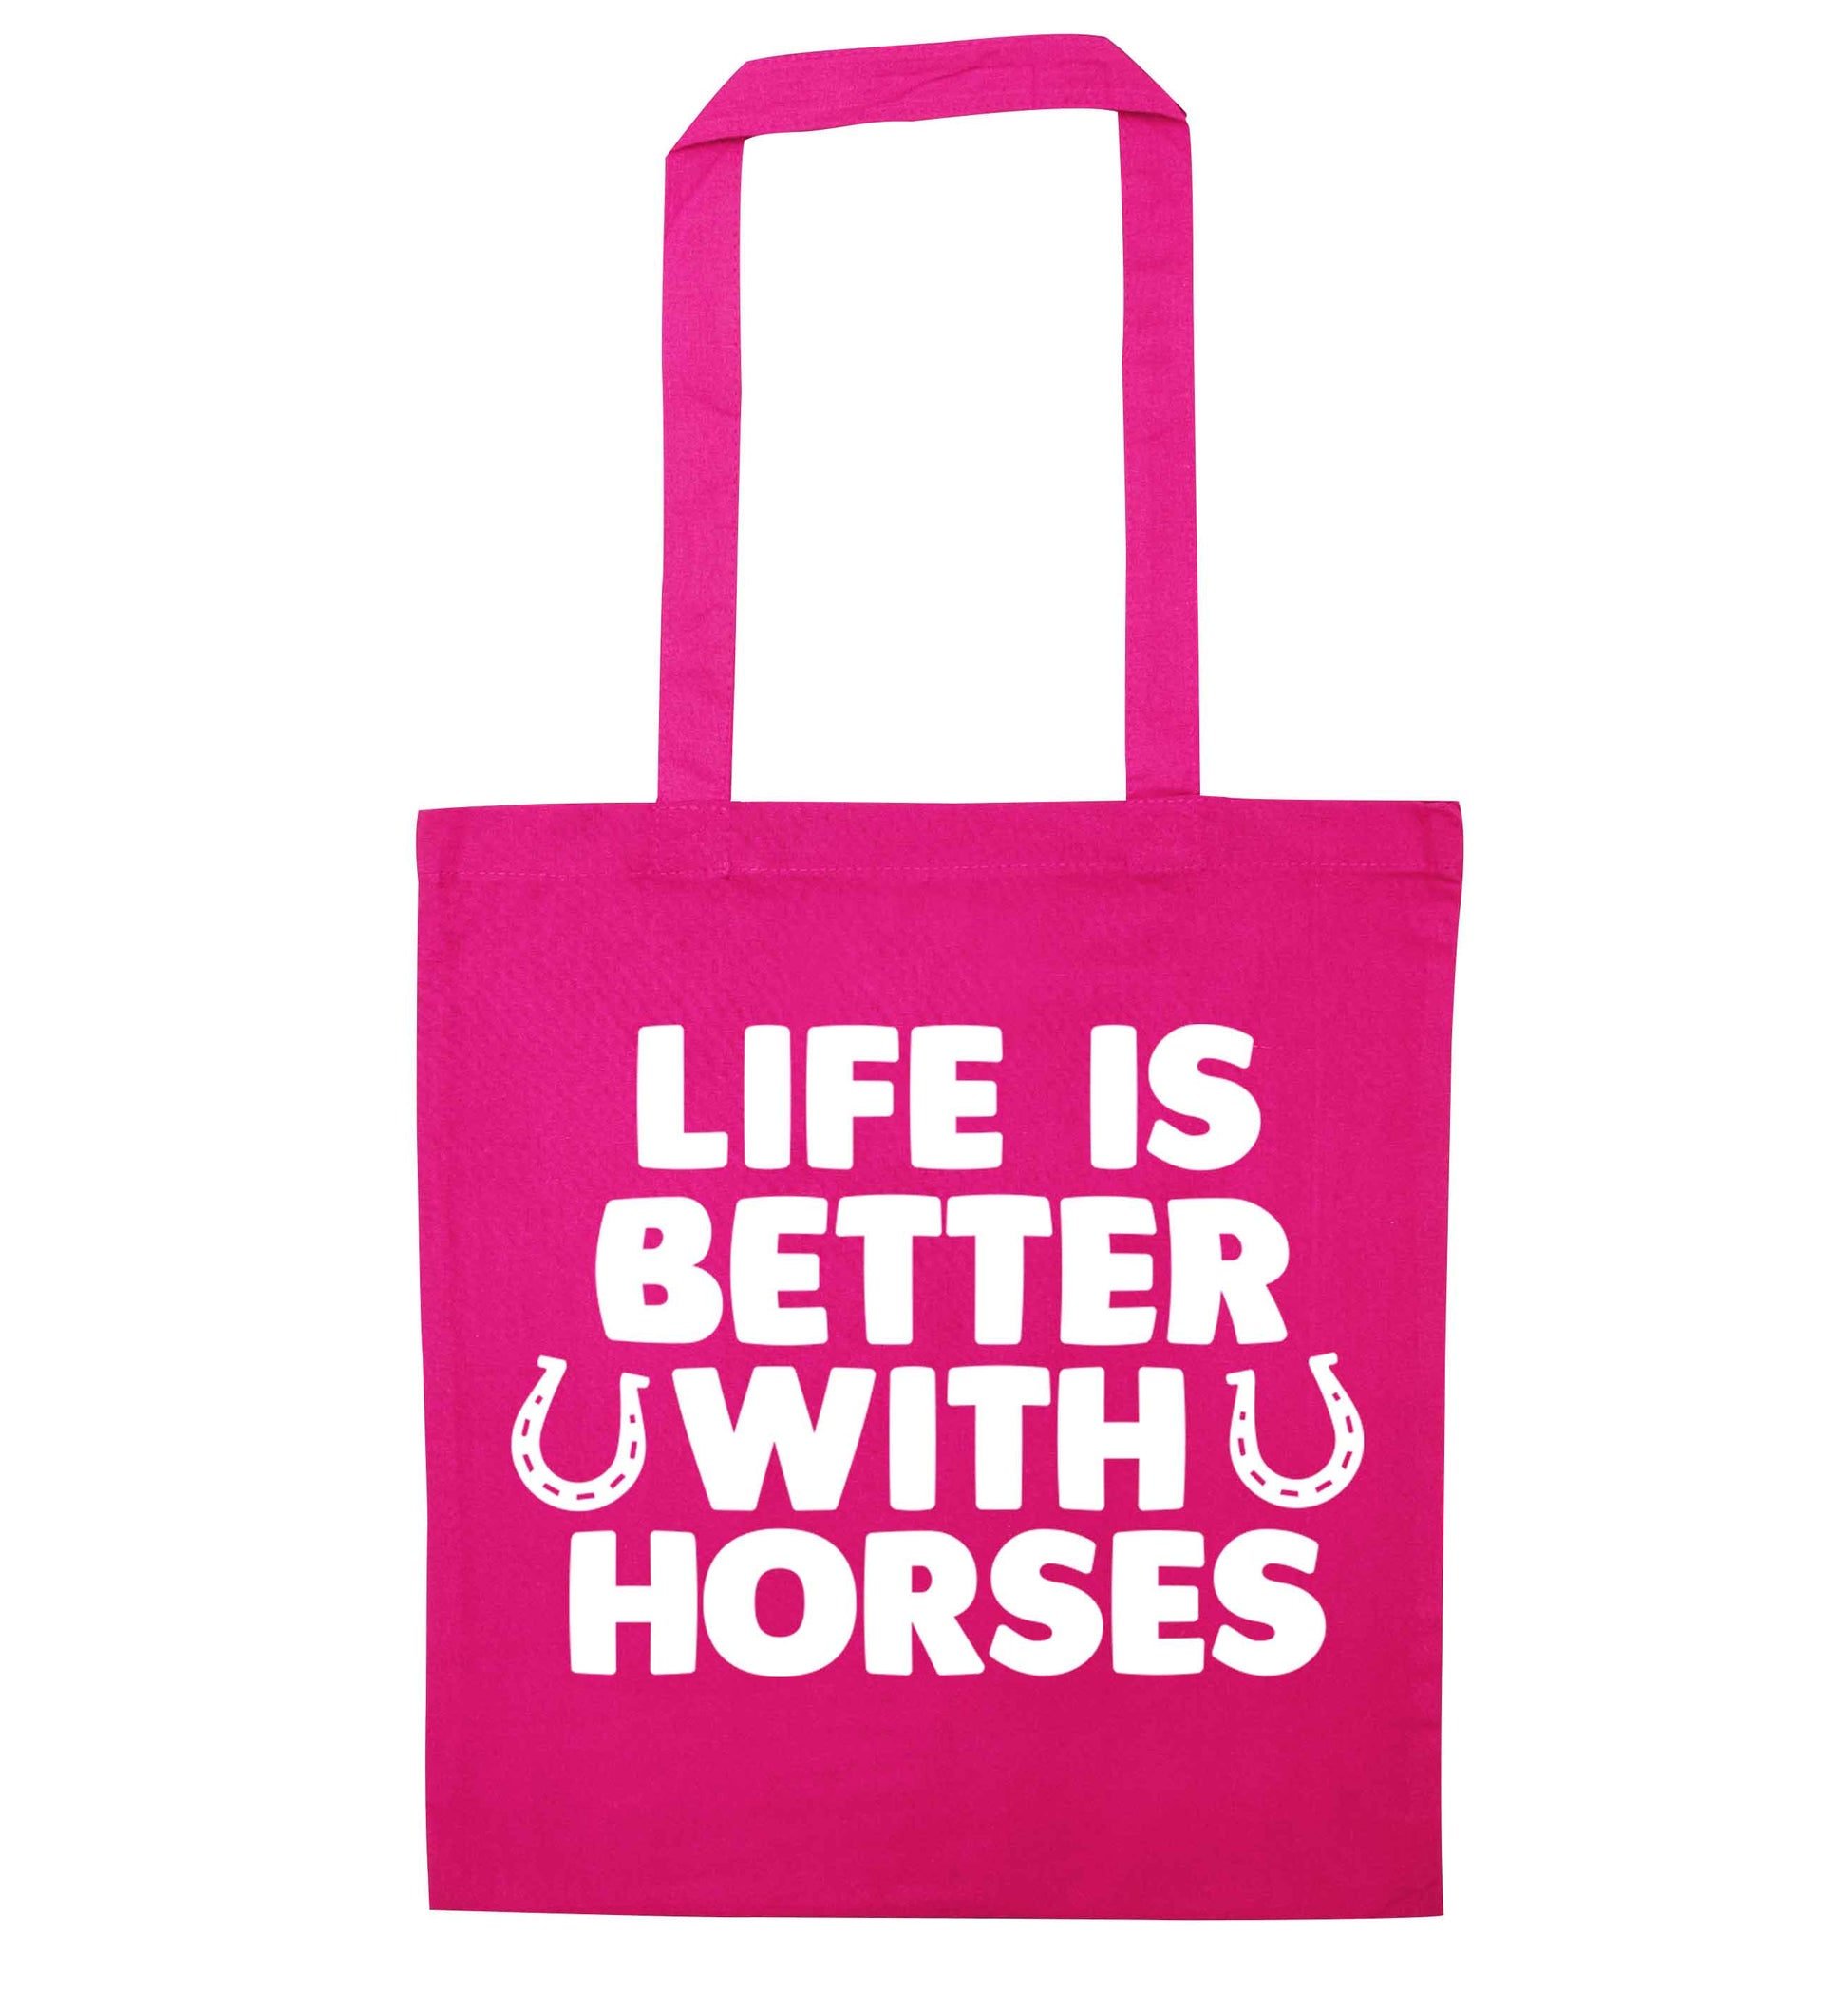 Life is better with horses pink tote bag